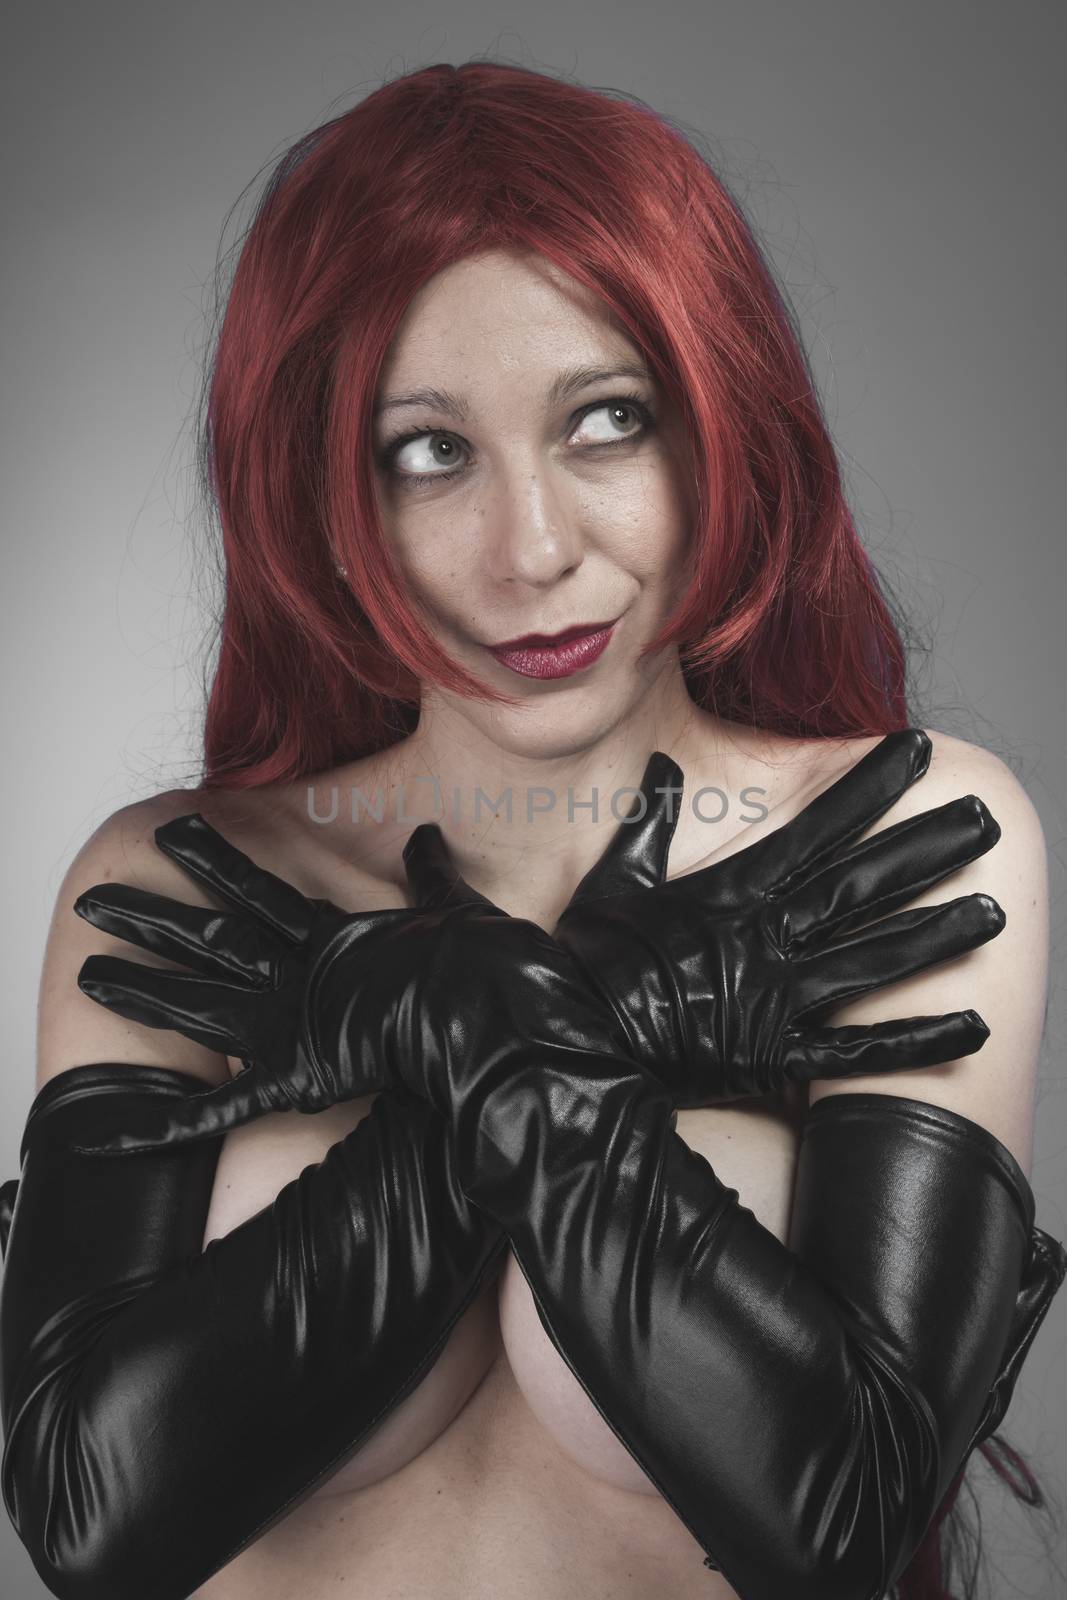 Female, redhead woman with black latex gloves, bare